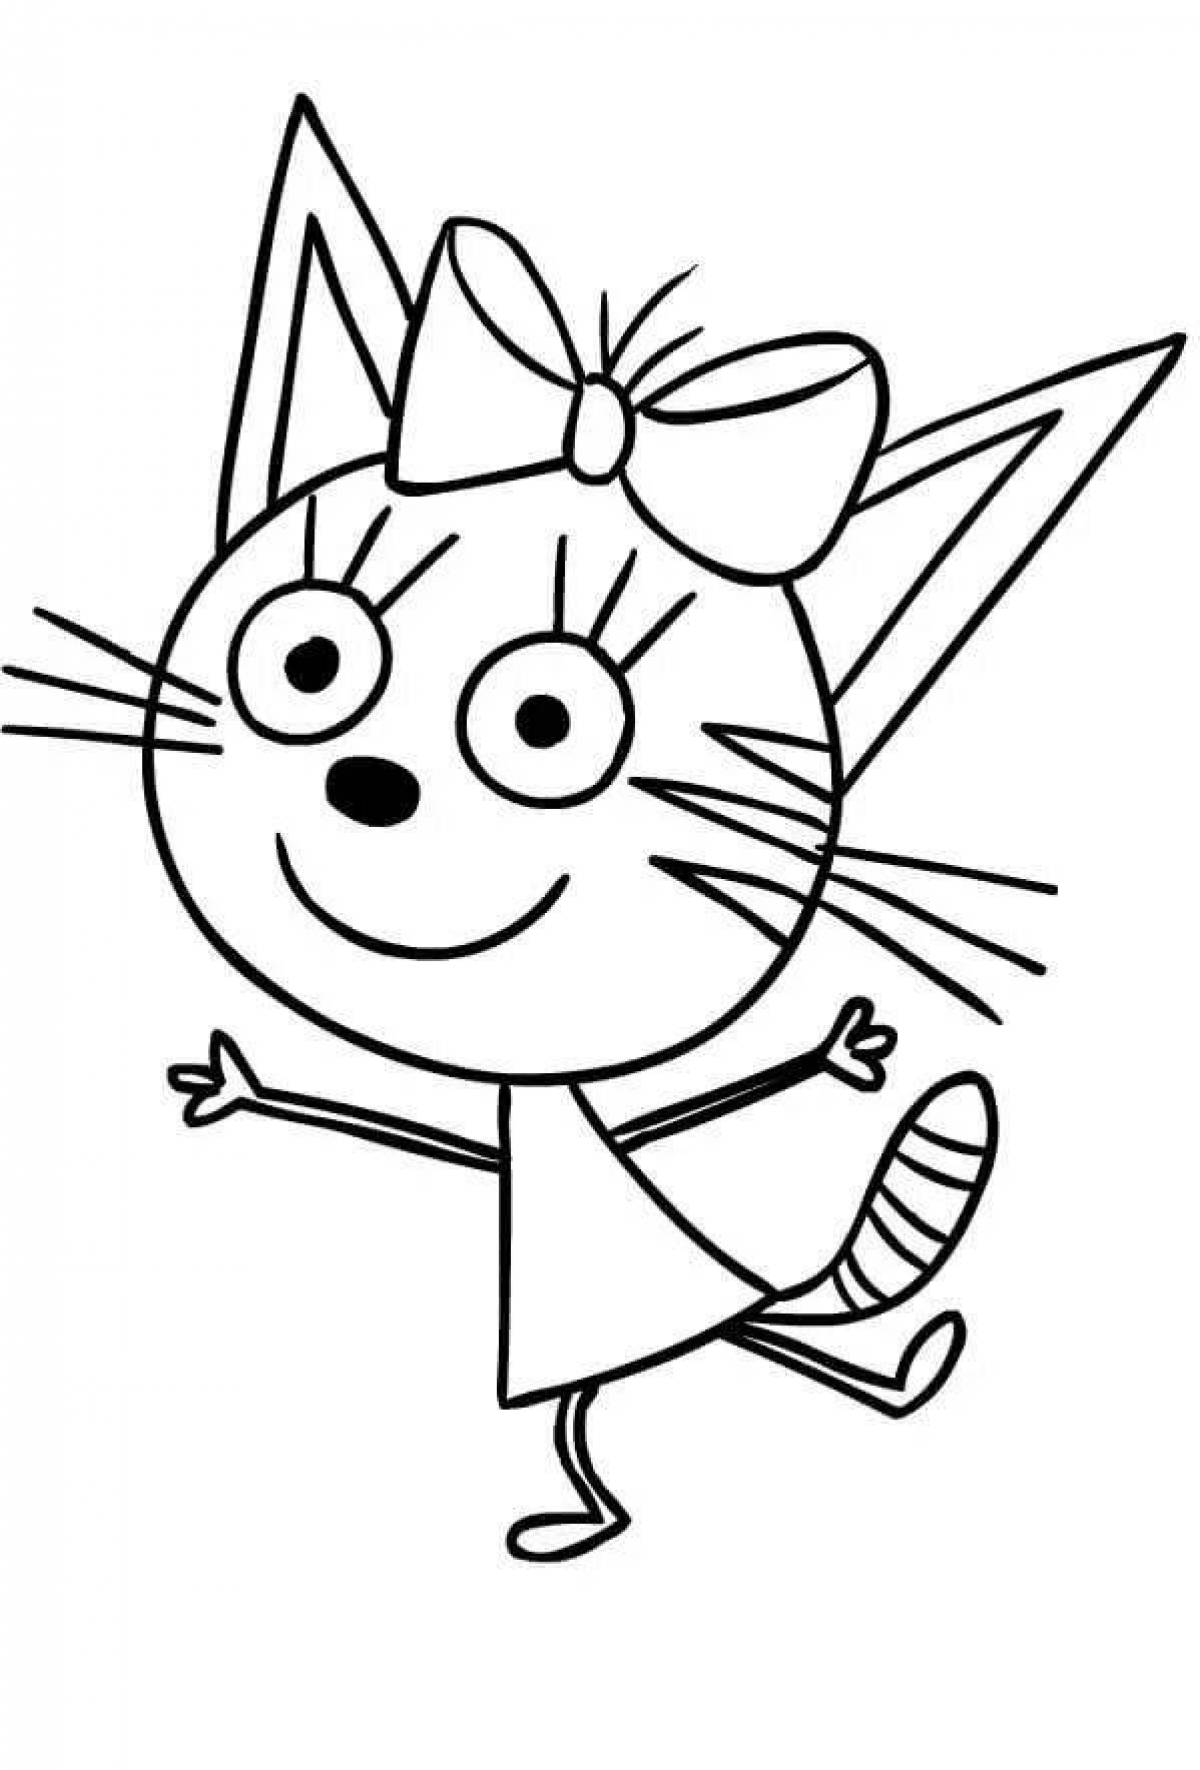 Adorable Three Cats Caramel Coloring Page